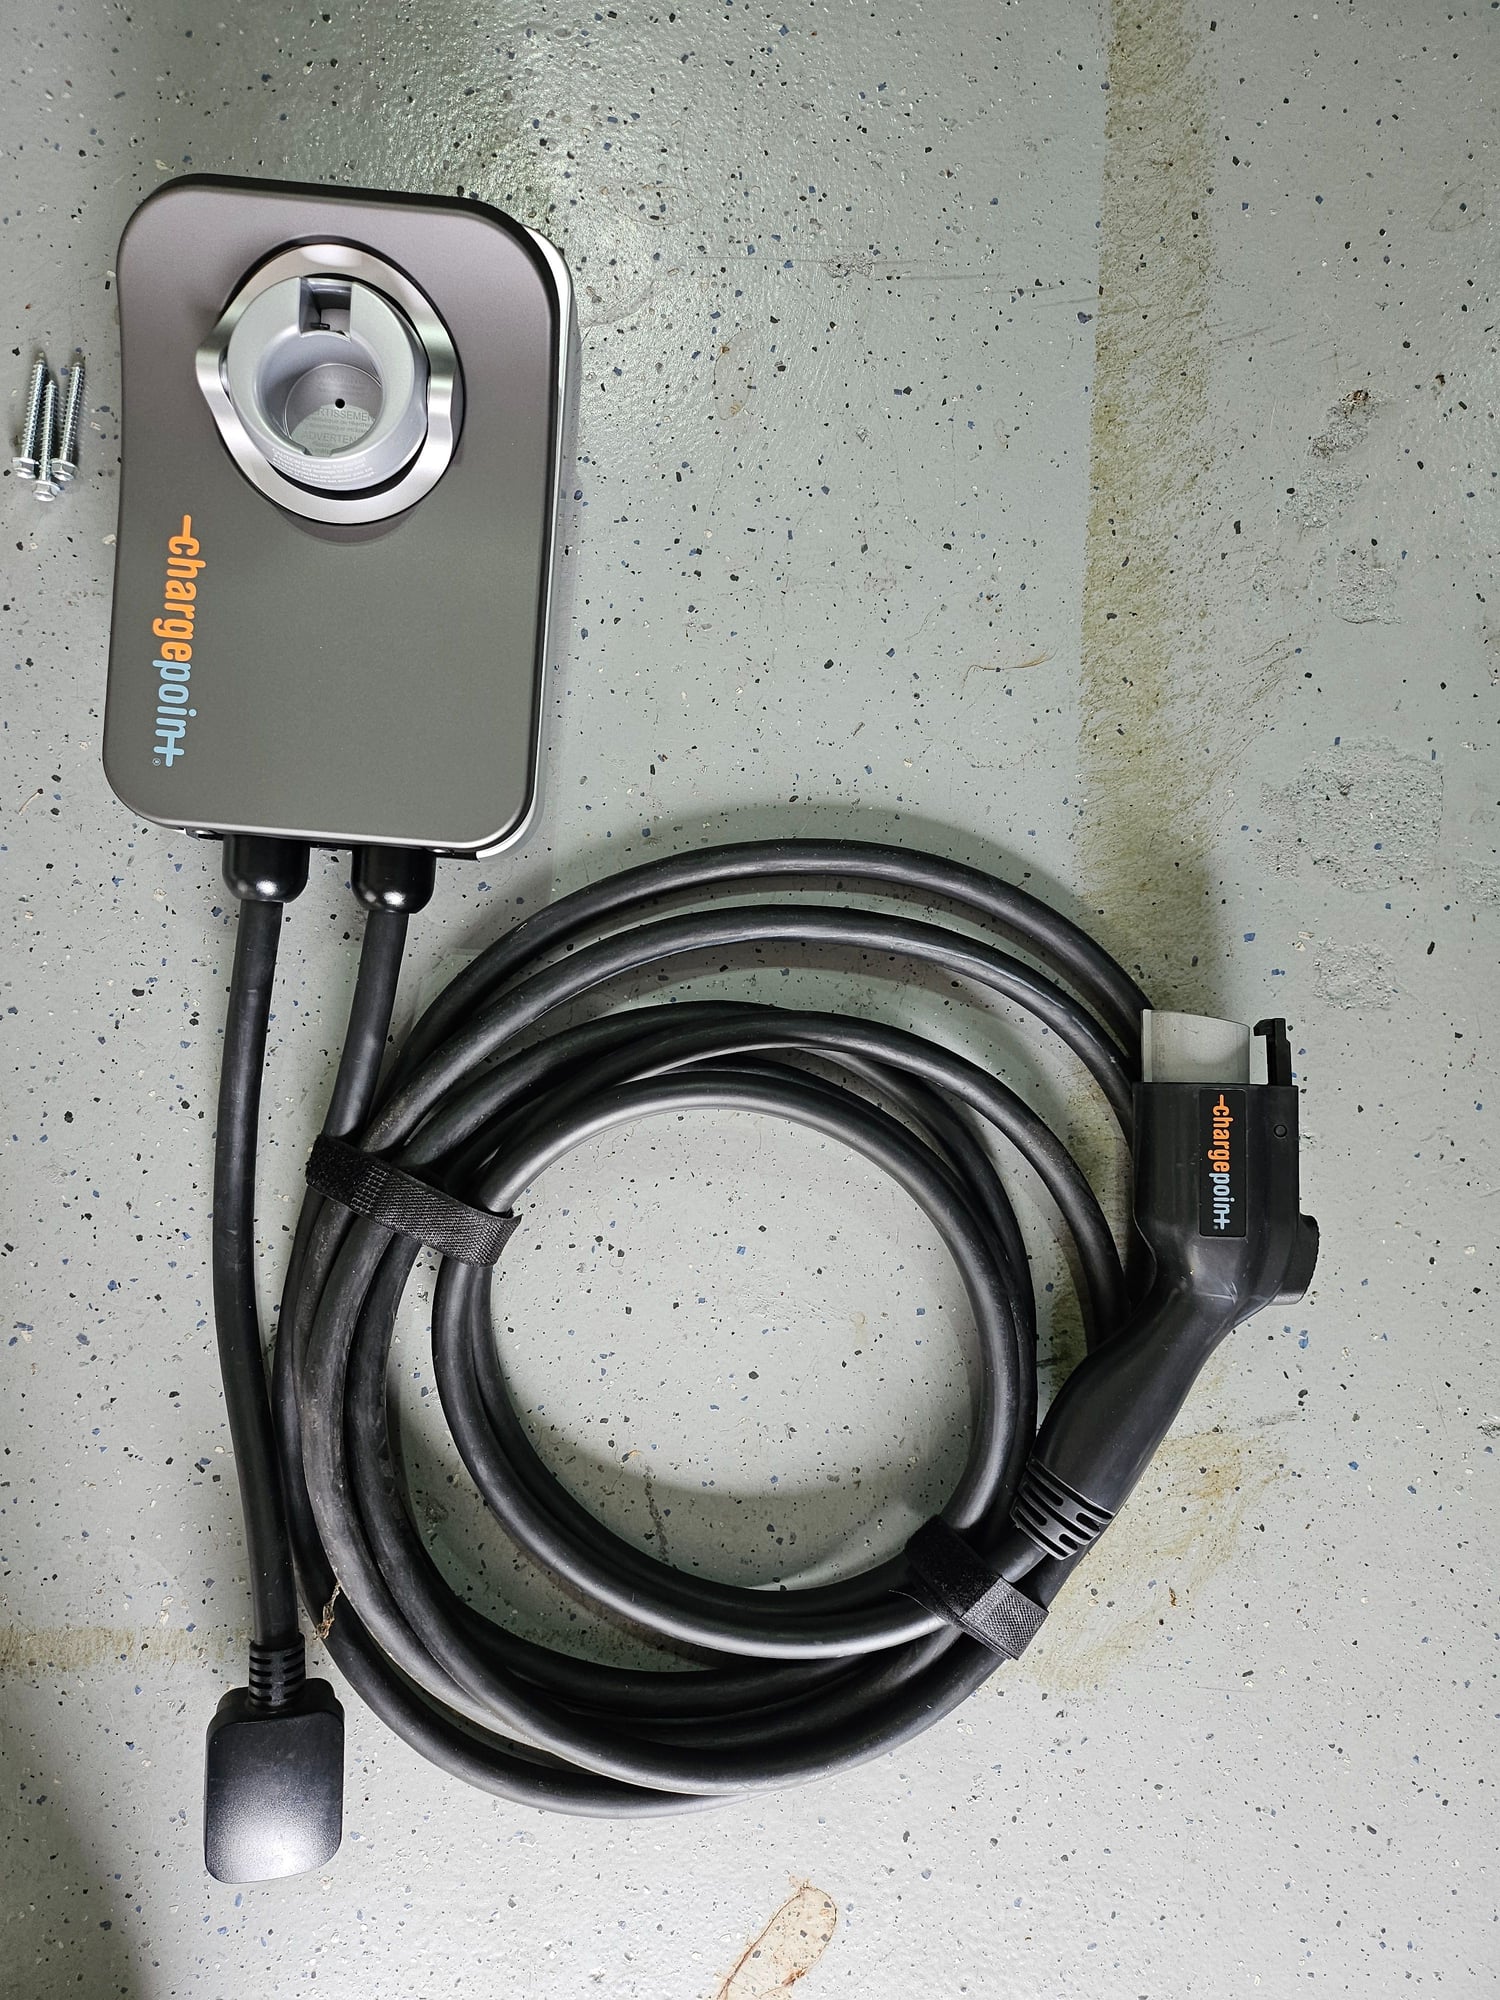 Miscellaneous - Charge Point+ Home Flex EV Charger Level 2 - Used - 2022 to 2025 Mercedes-Benz EQB-Class - 2022 to 2025 Mercedes-Benz EQE-Class - 2022 to 2025 Mercedes-Benz EQS-Class - Miramar, FL 33027, United States